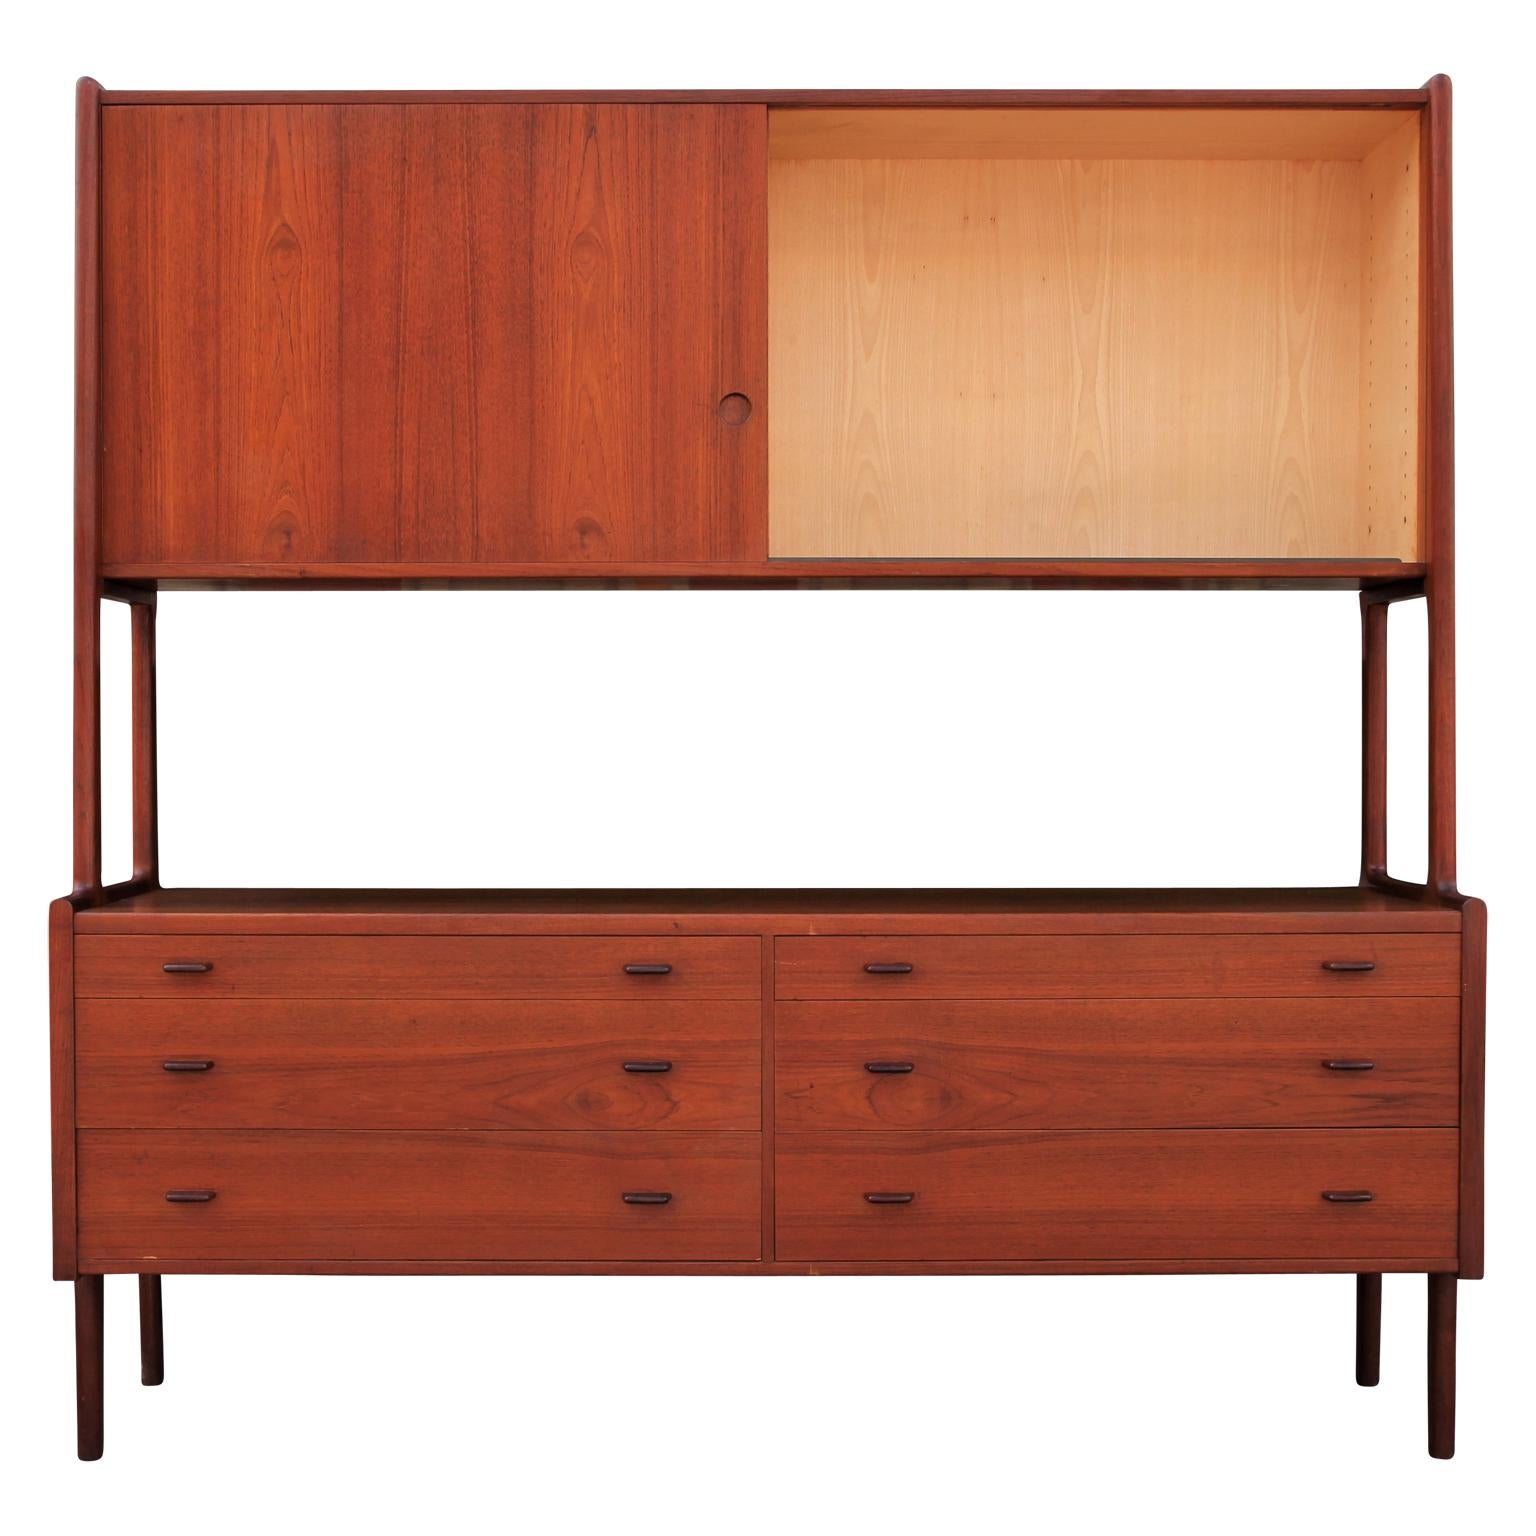 Danish modern Hans Wegner double credenza / highboard in teak wood. Model RY-20 manufactured in Denmark in the late 1950s by Ry Mobler. This beautiful piece features a top with two large sliding doors revealing cupboards with two adjustable shelves